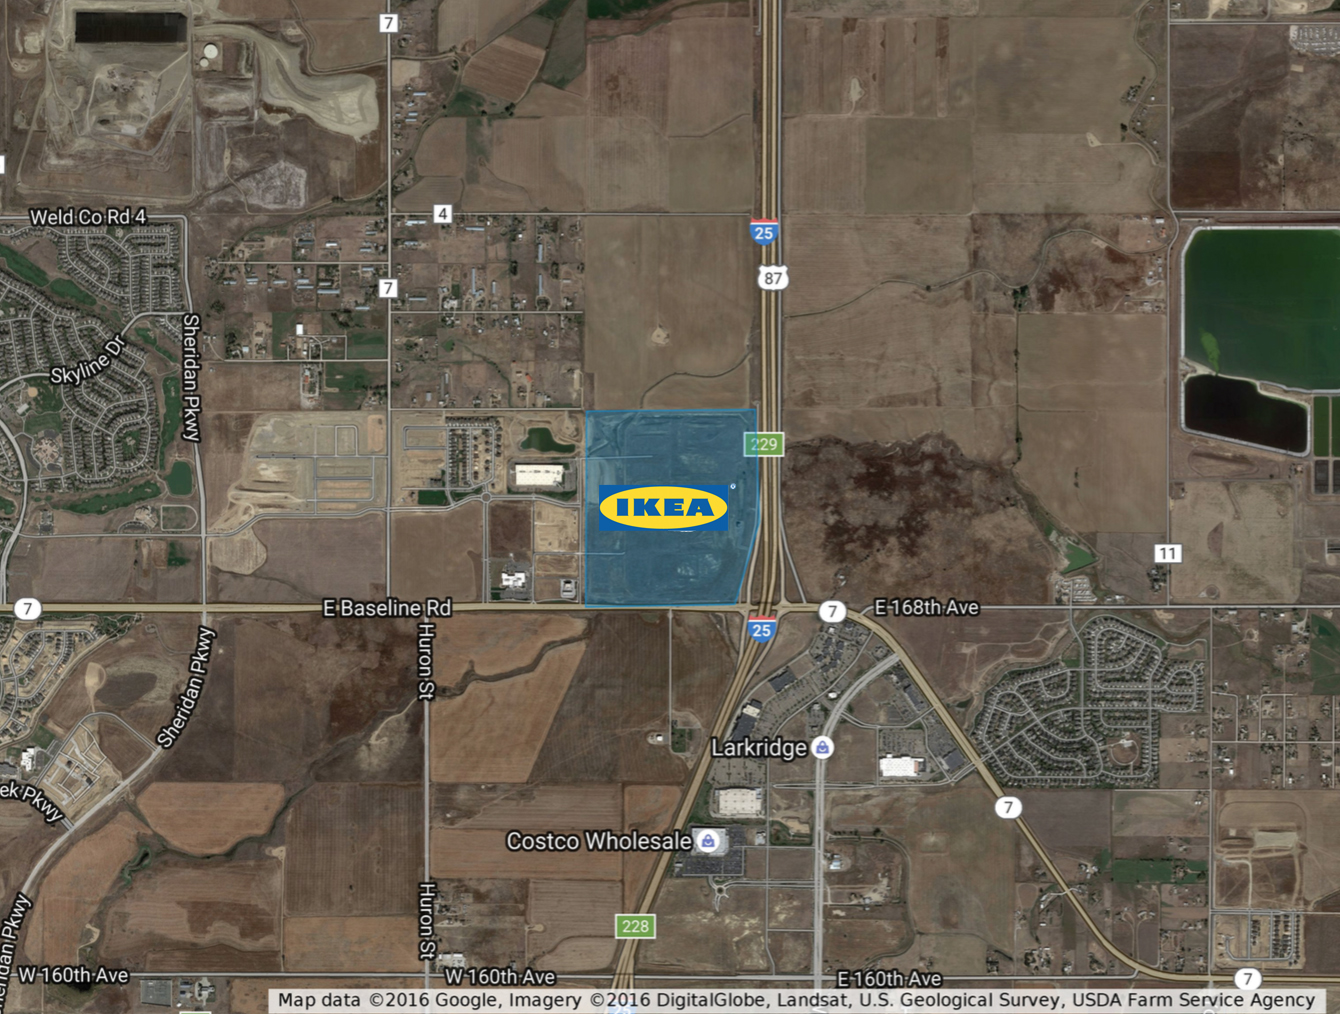 IKEA bought 123 acres in Broomfield.